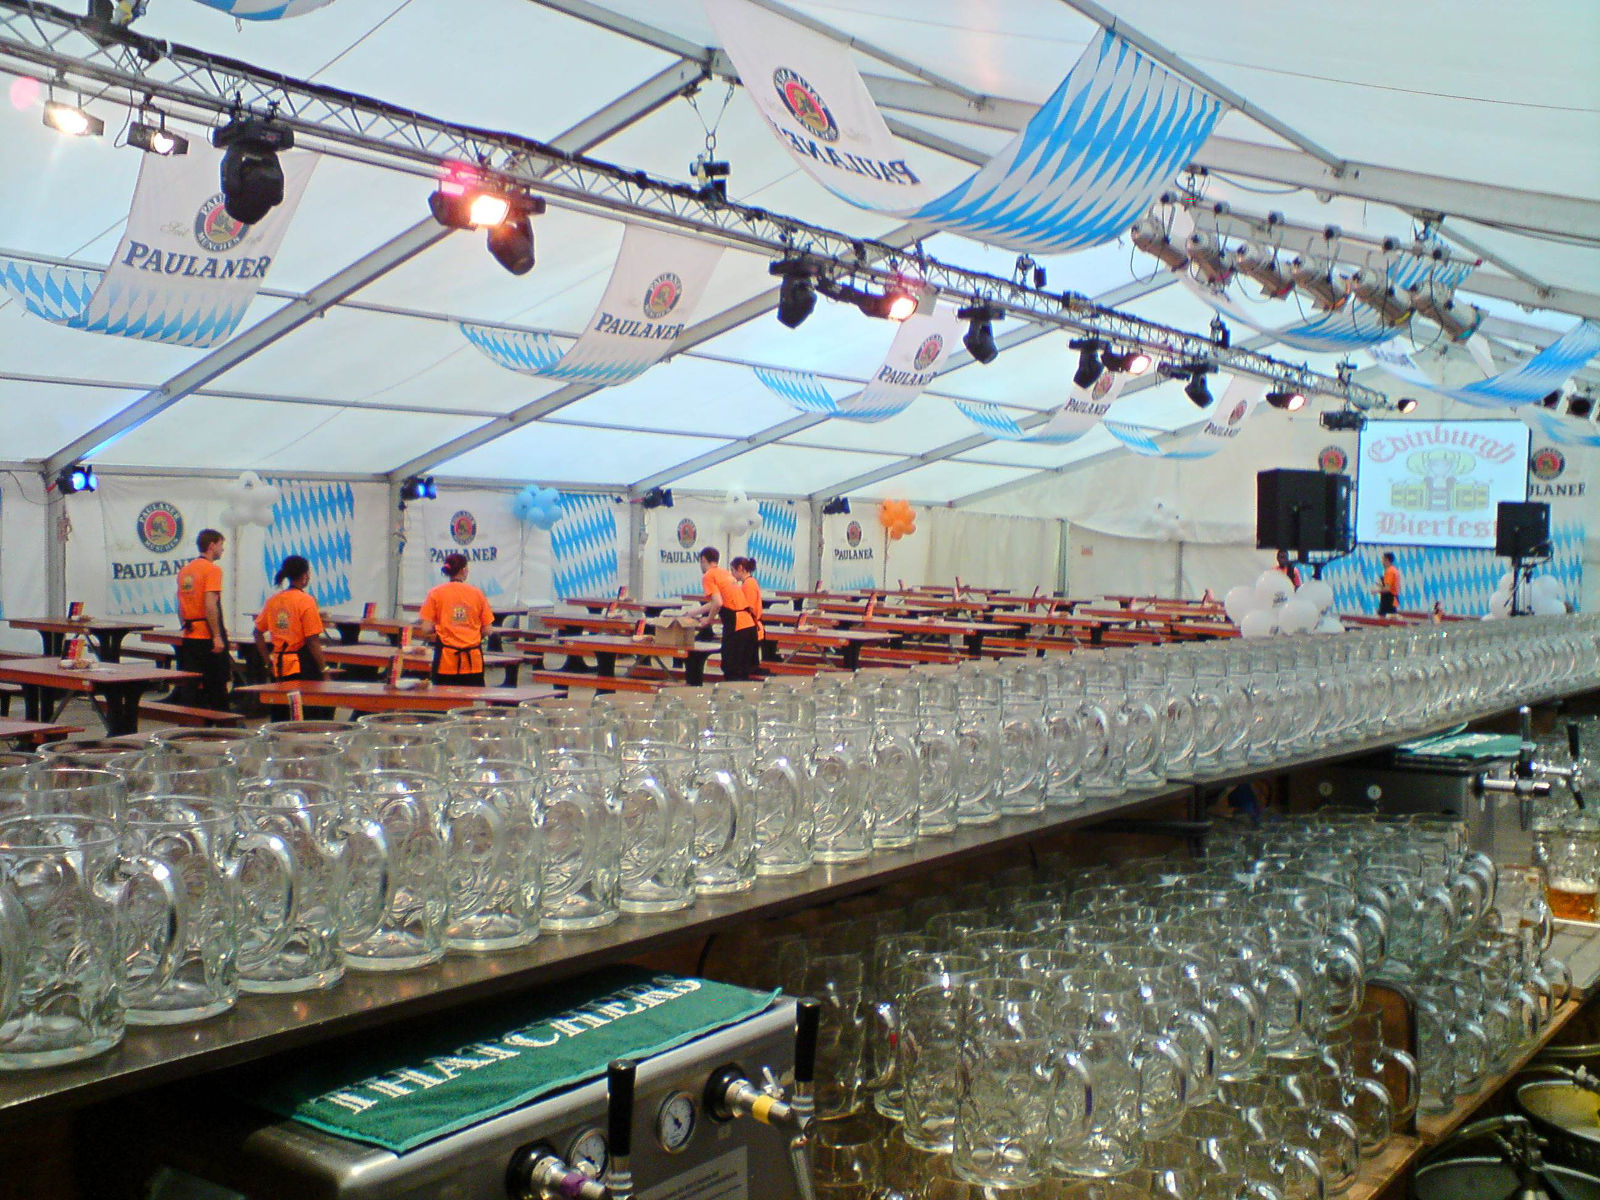 Sporting Hire - Beer Festival in 20m wide structure